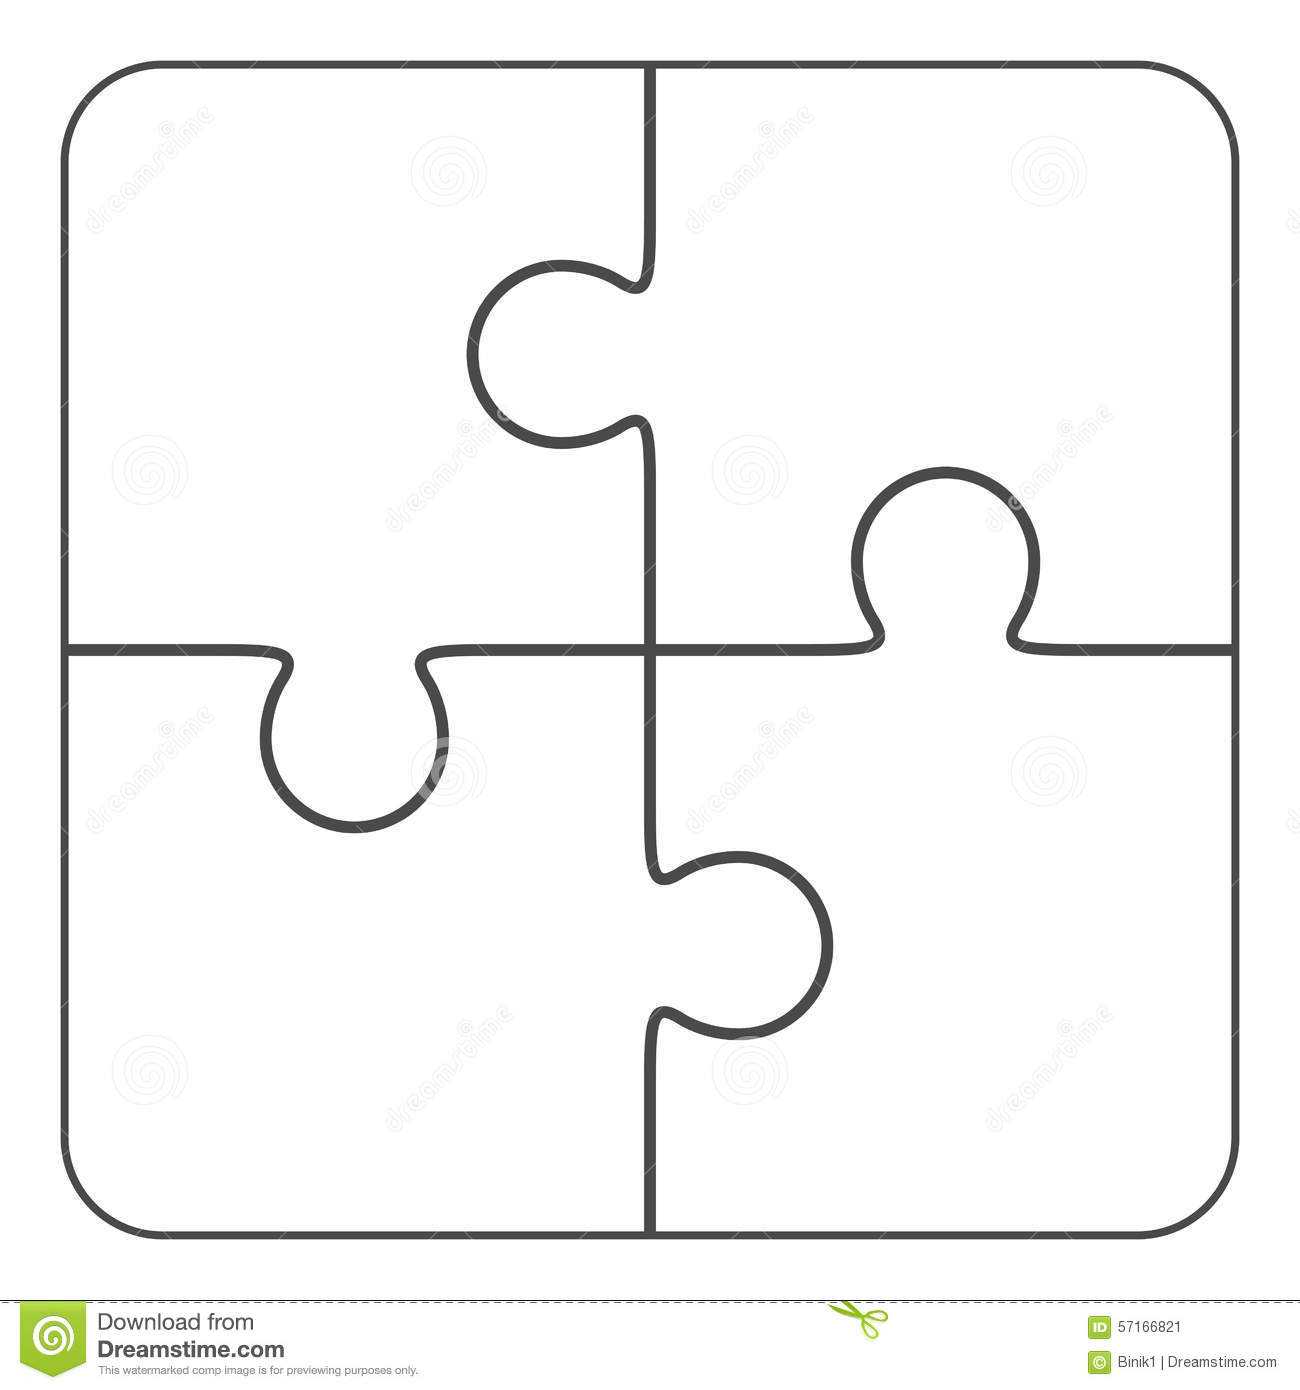 Jigsaw Puzzle Blank 2X2, Four Pieces Stock Illustration With Blank Jigsaw Piece Template